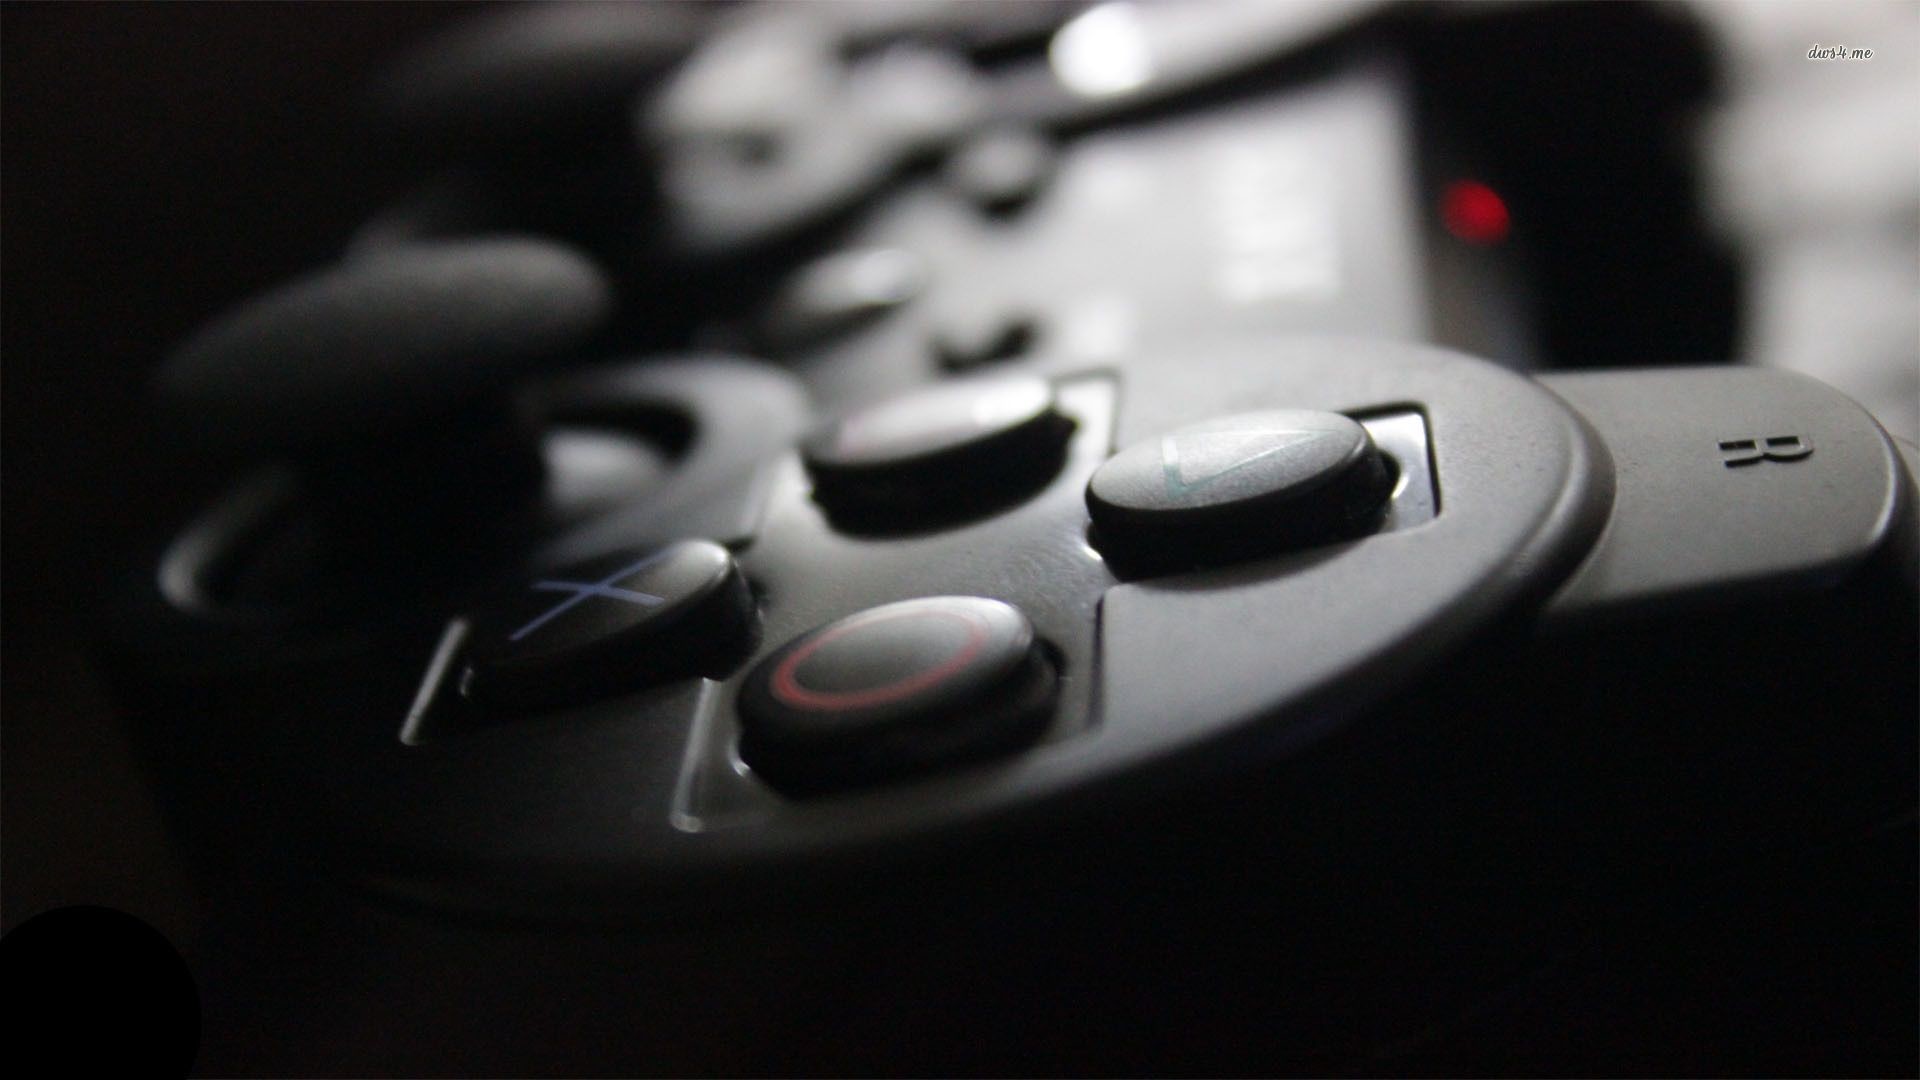 1920x1080 PS3 Controller wallpaper - Game wallpapers - #15425